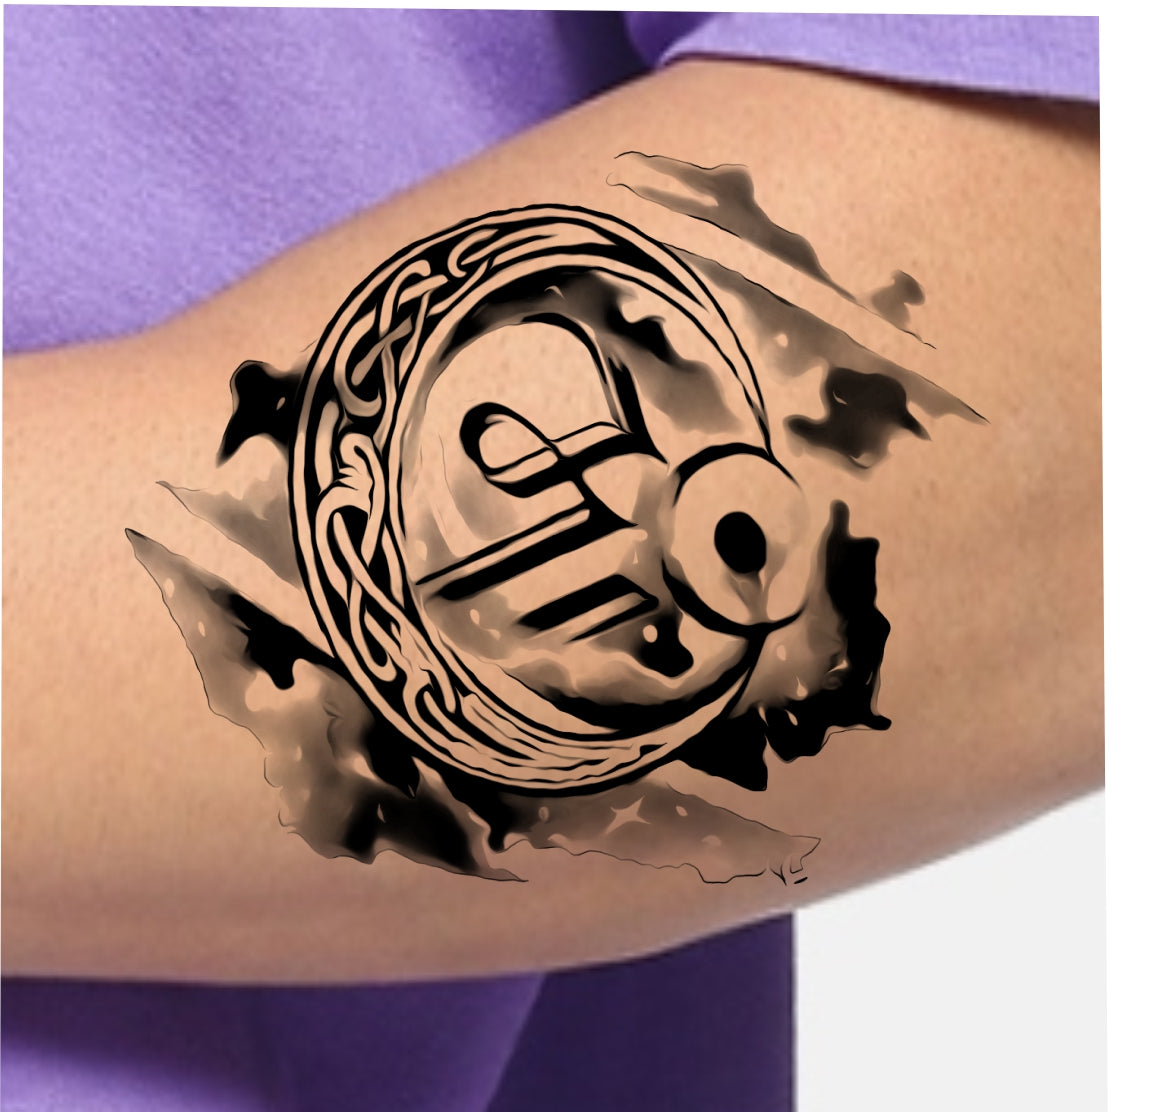 New Black Maa Temporary Body Tattoo For Men and Woman